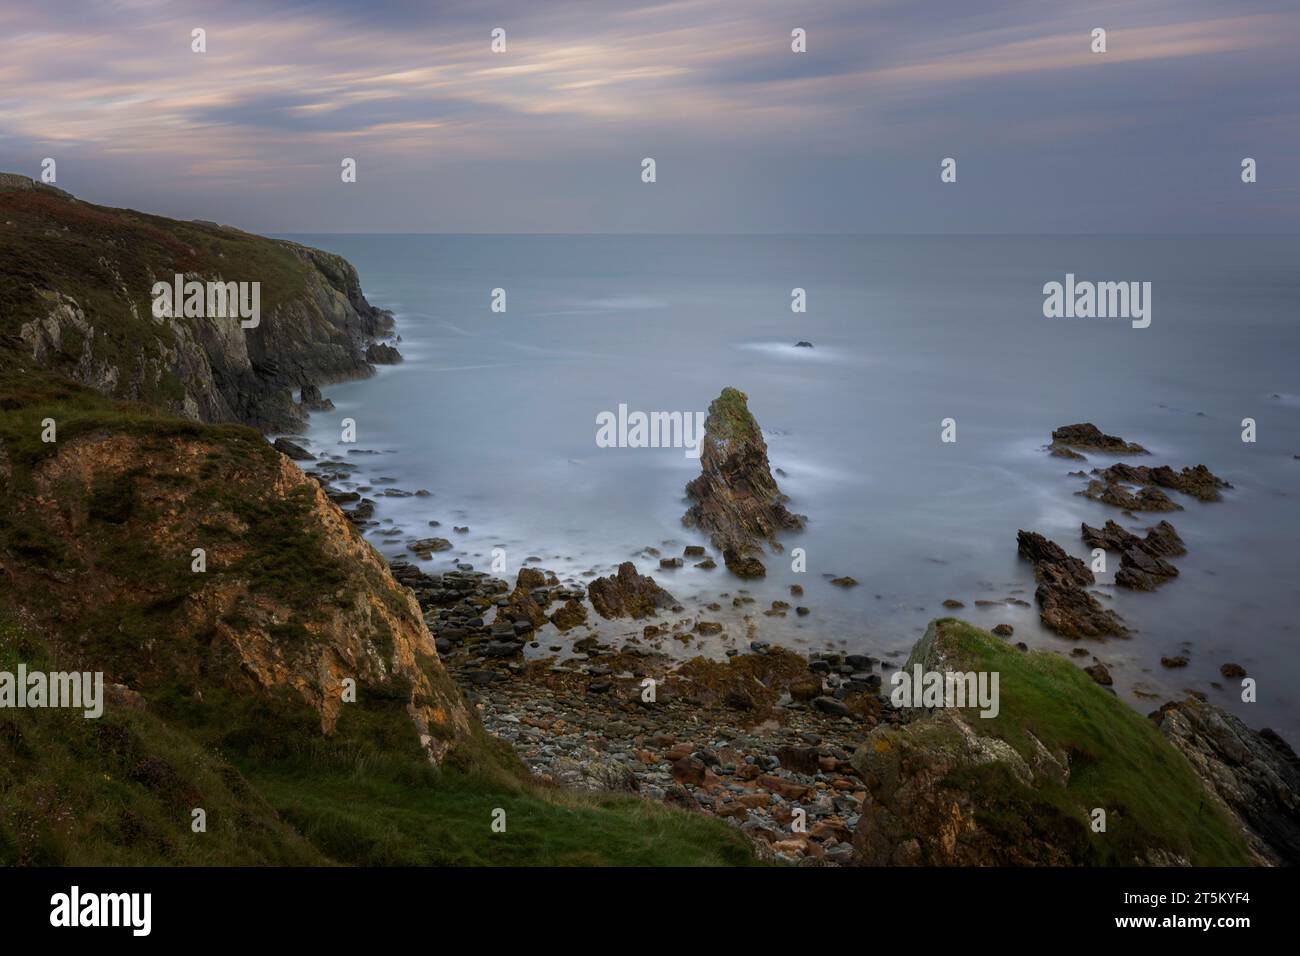 Iconic sea stacks in Rhoscolyn, Wales. Stock Photo